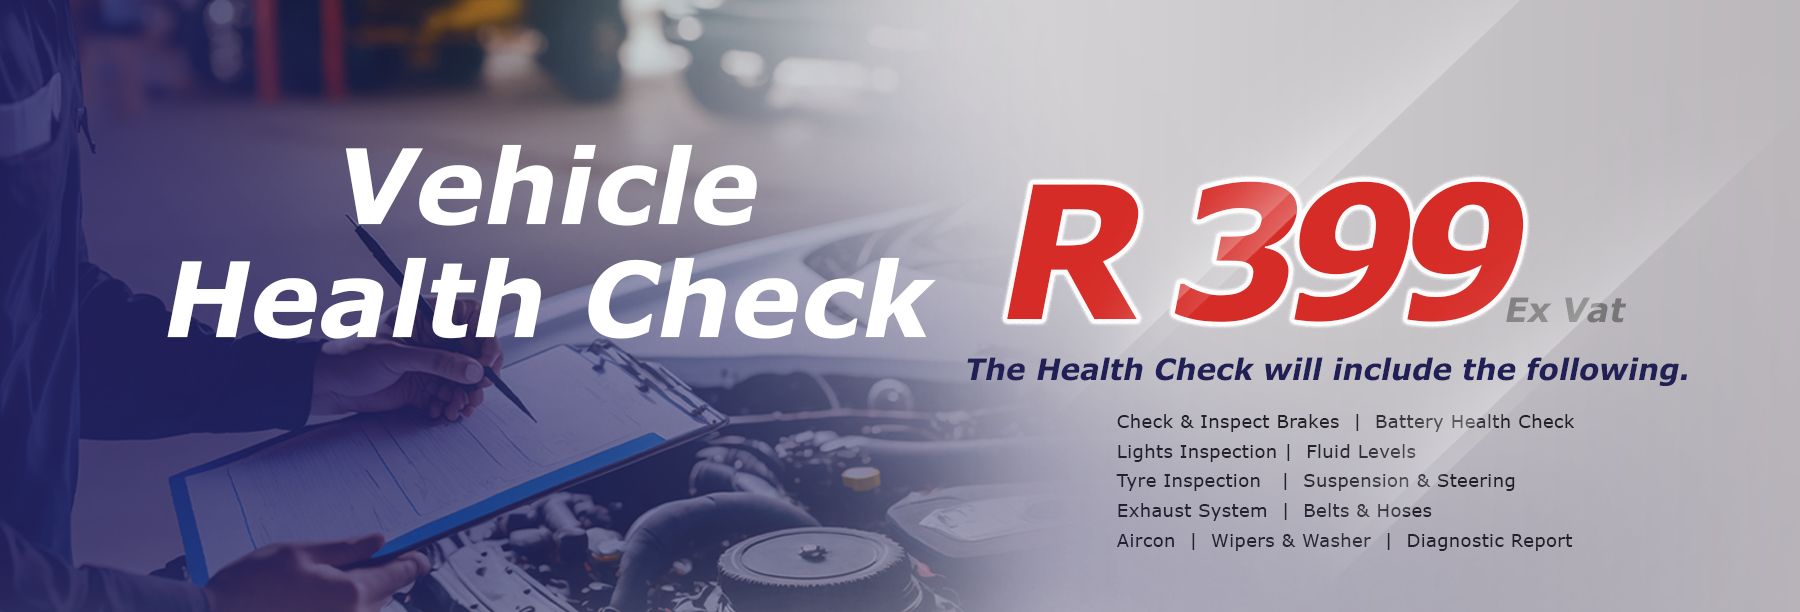 Vehicle Health Check R399 Excluding VAT